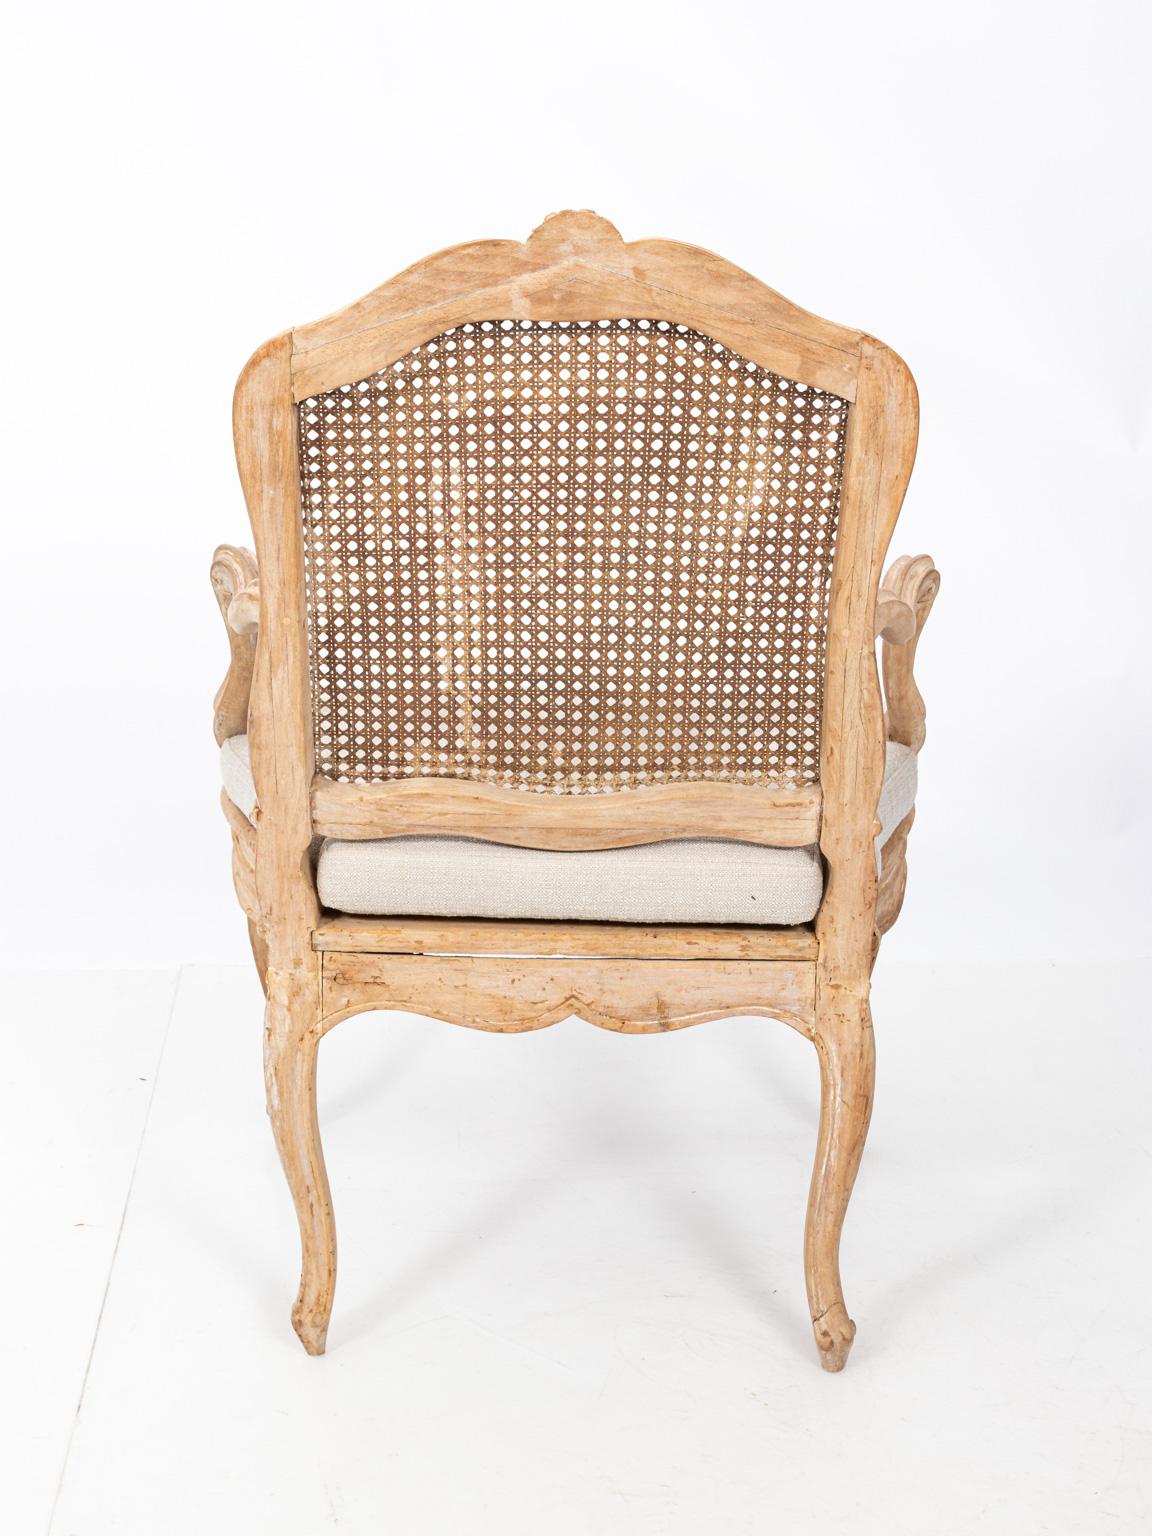 Pair of French armchairs with original stamp and upholstered seat, circa 19th century. Please note of wear consistent with age including a gap in one top rail.